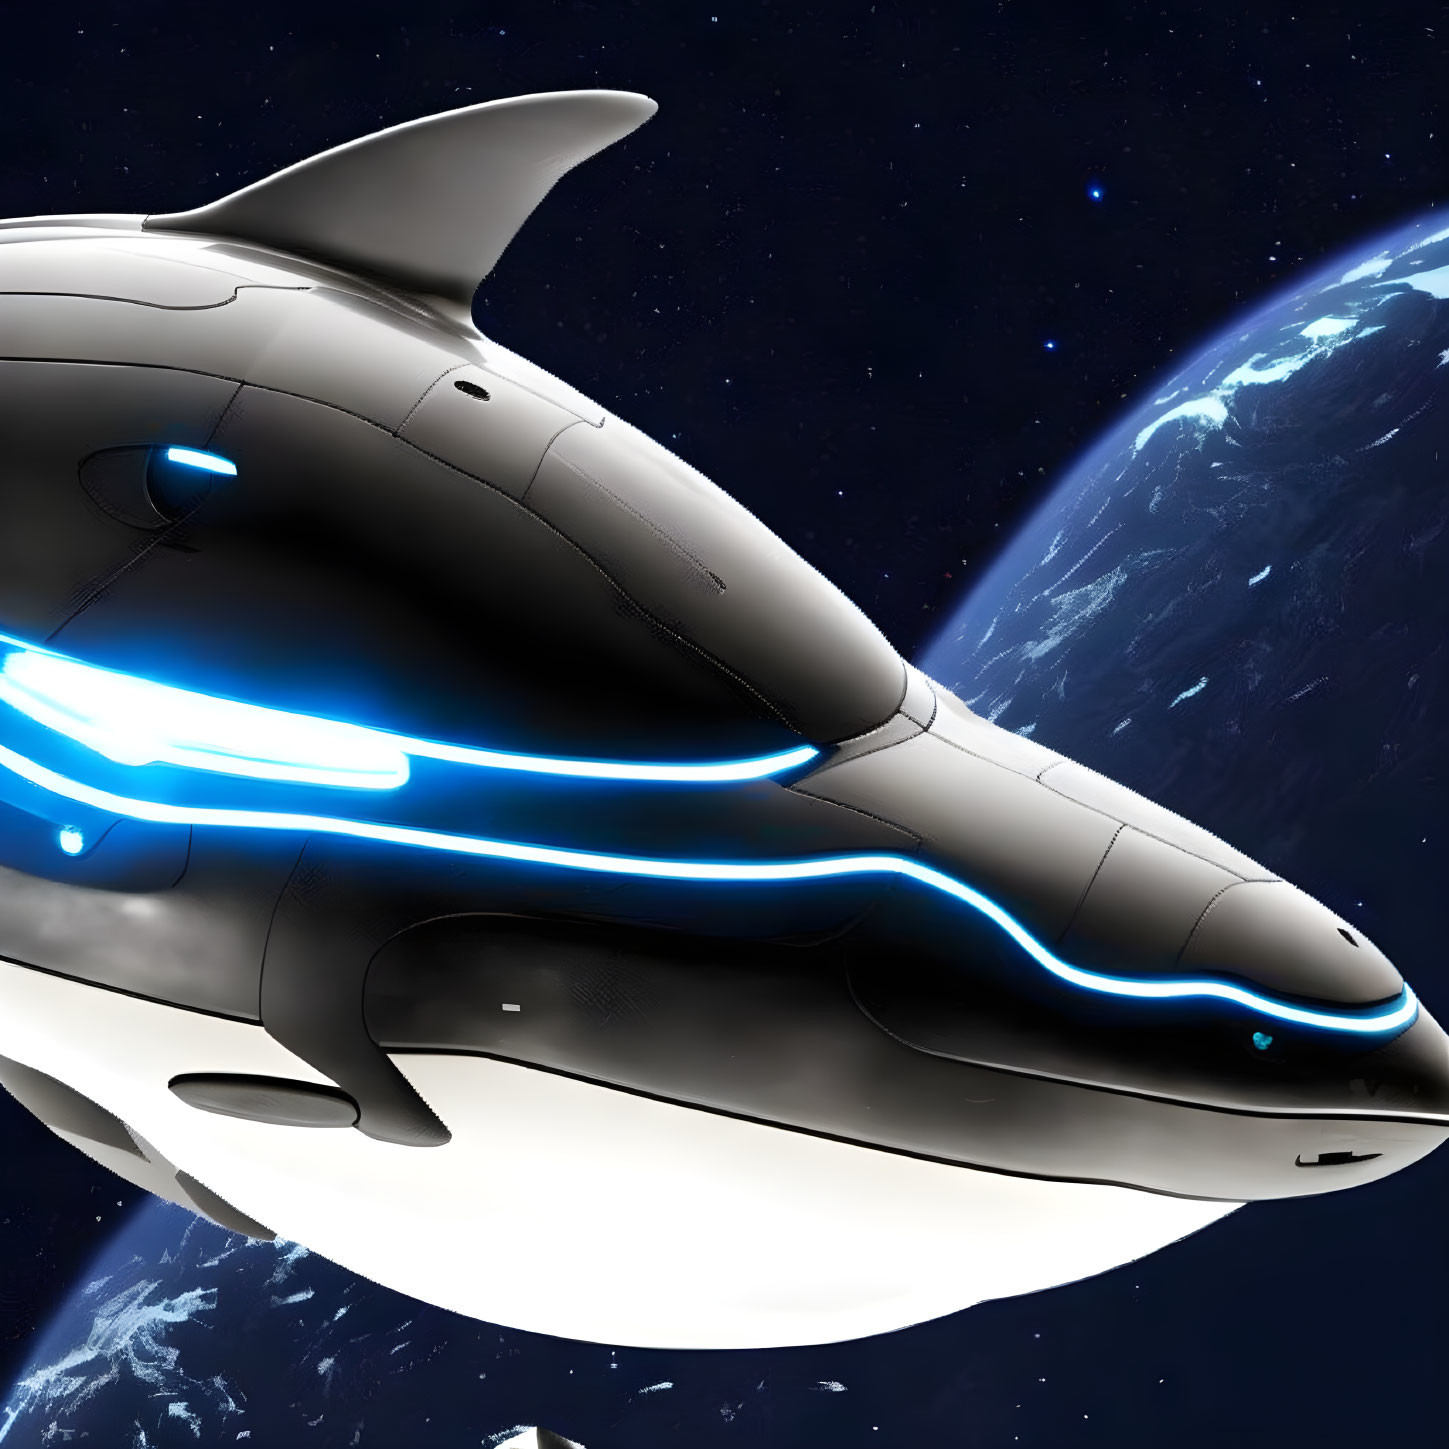 Dolphin-shaped spacecraft with blue neon highlights orbits Earth.